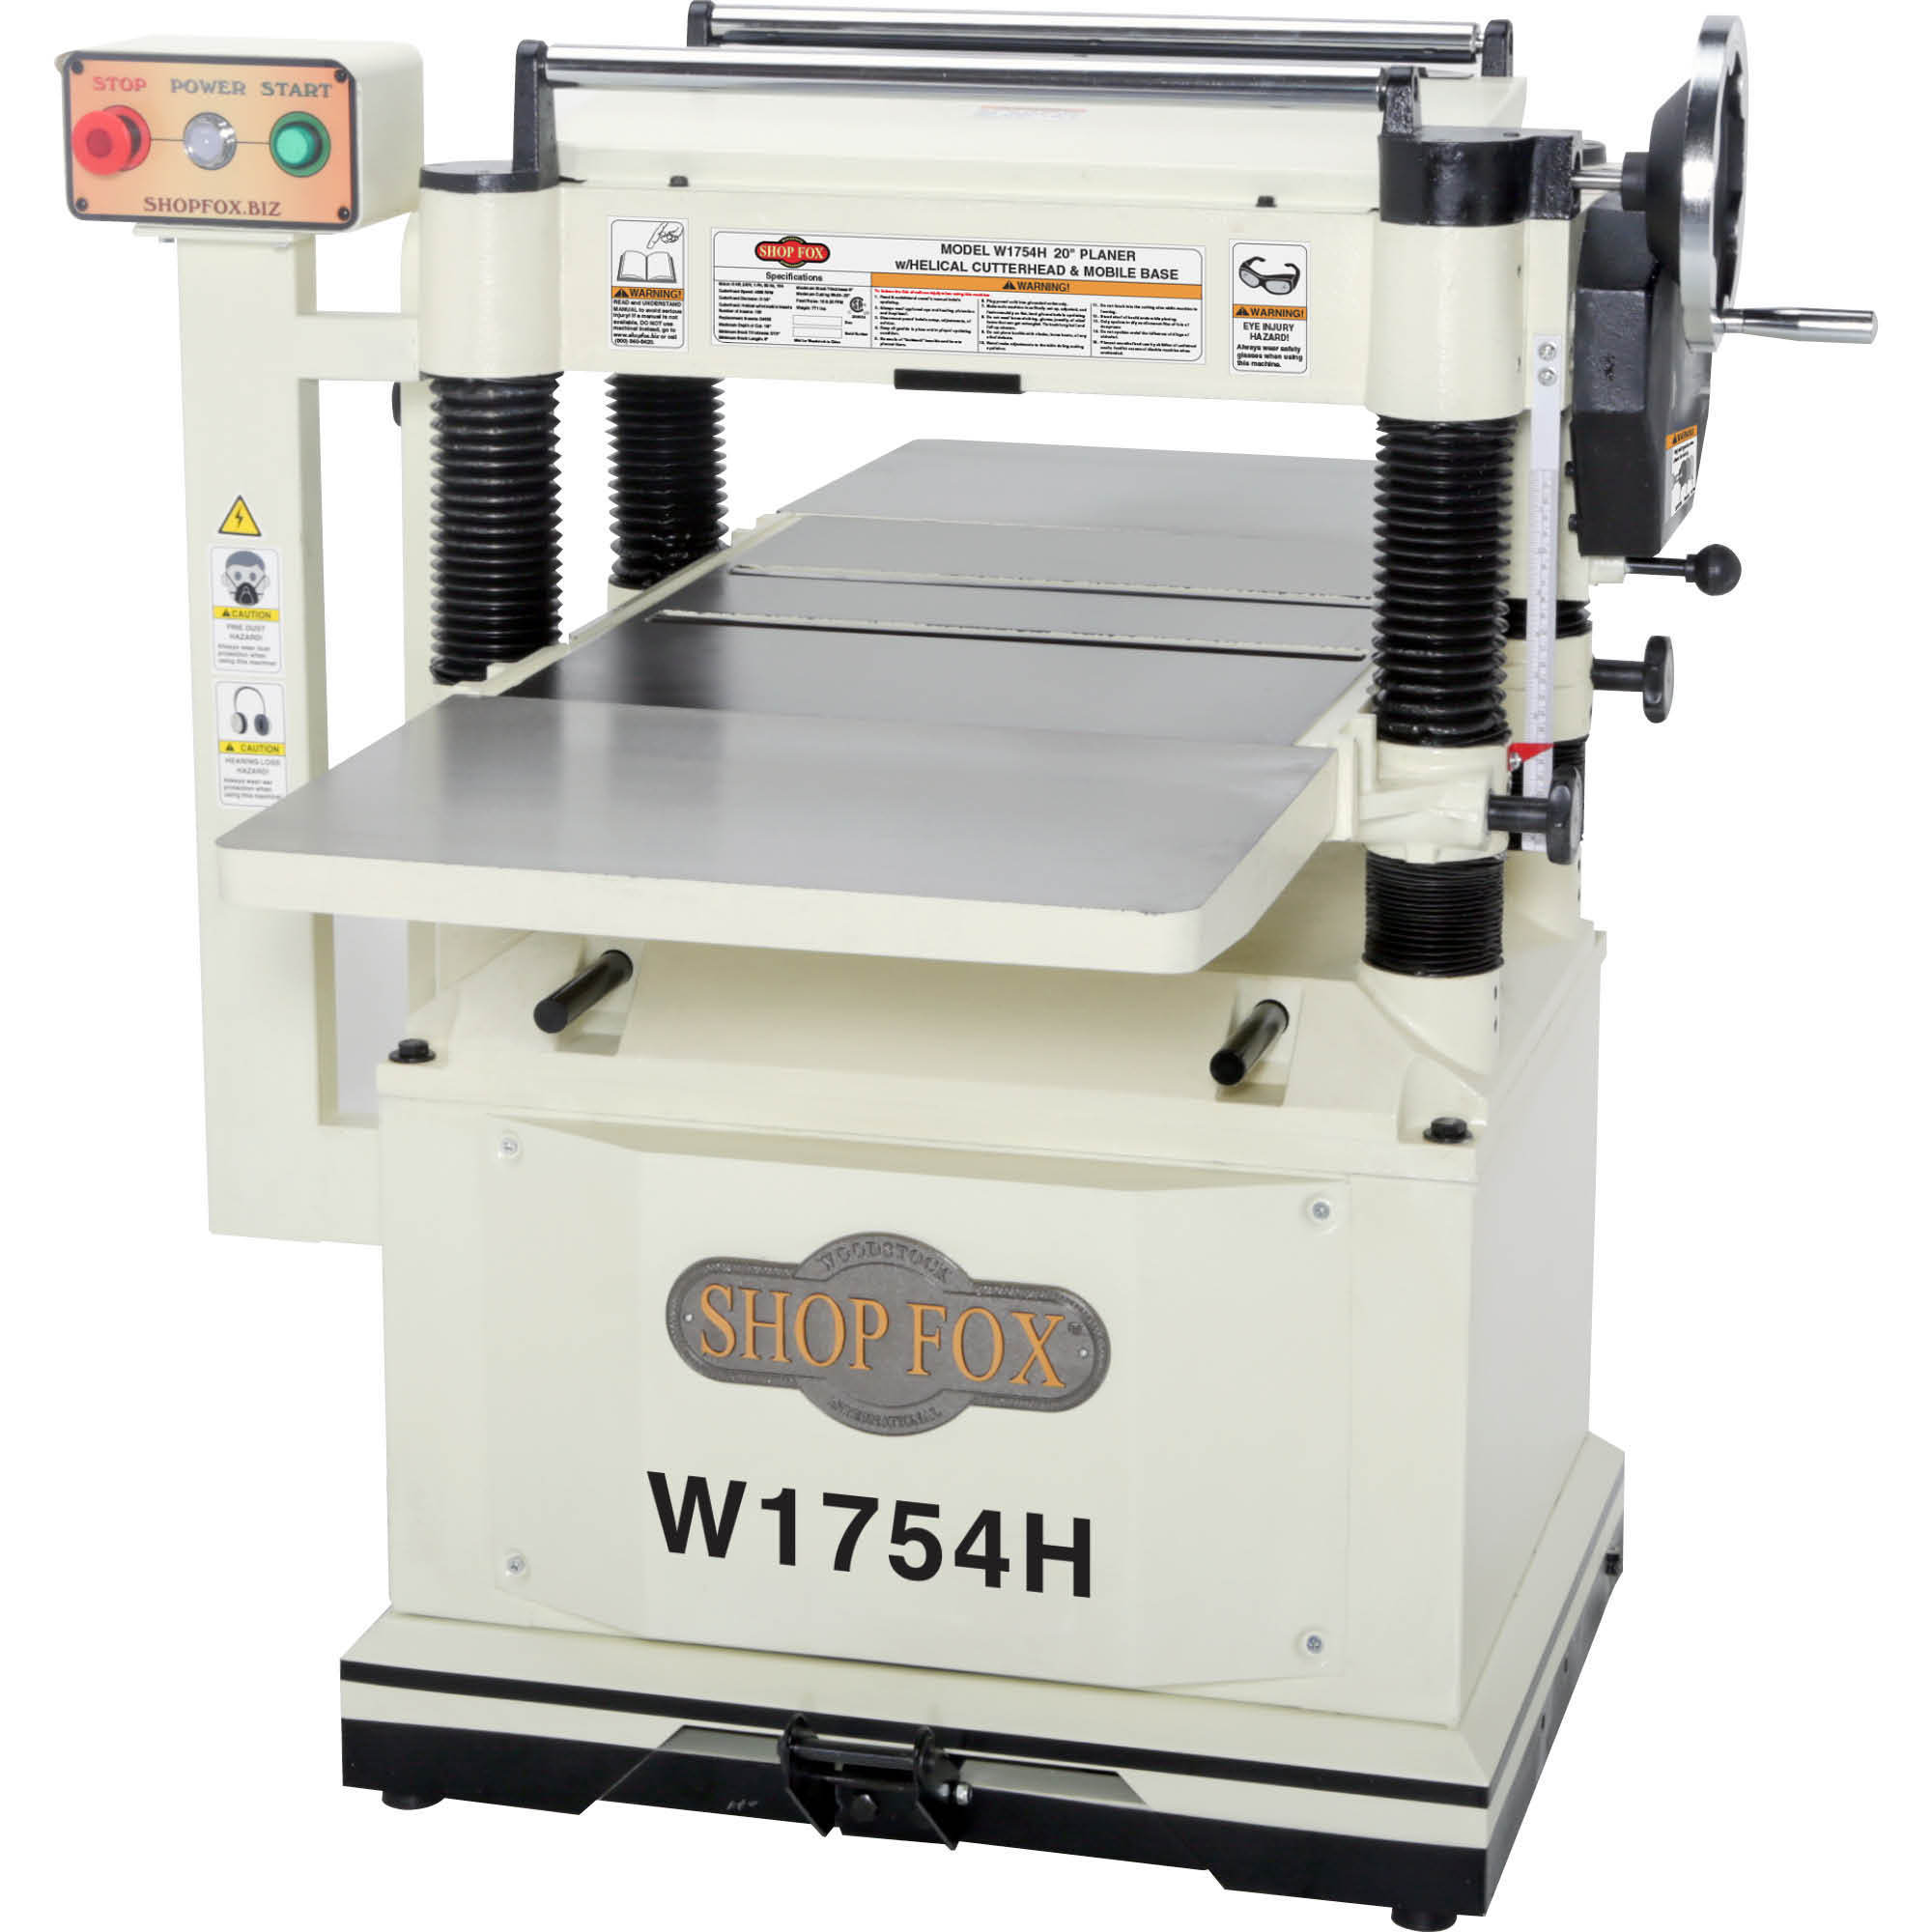 Shop Fox, 20Inch Helical Planer with Mobile Base, Model W1754H